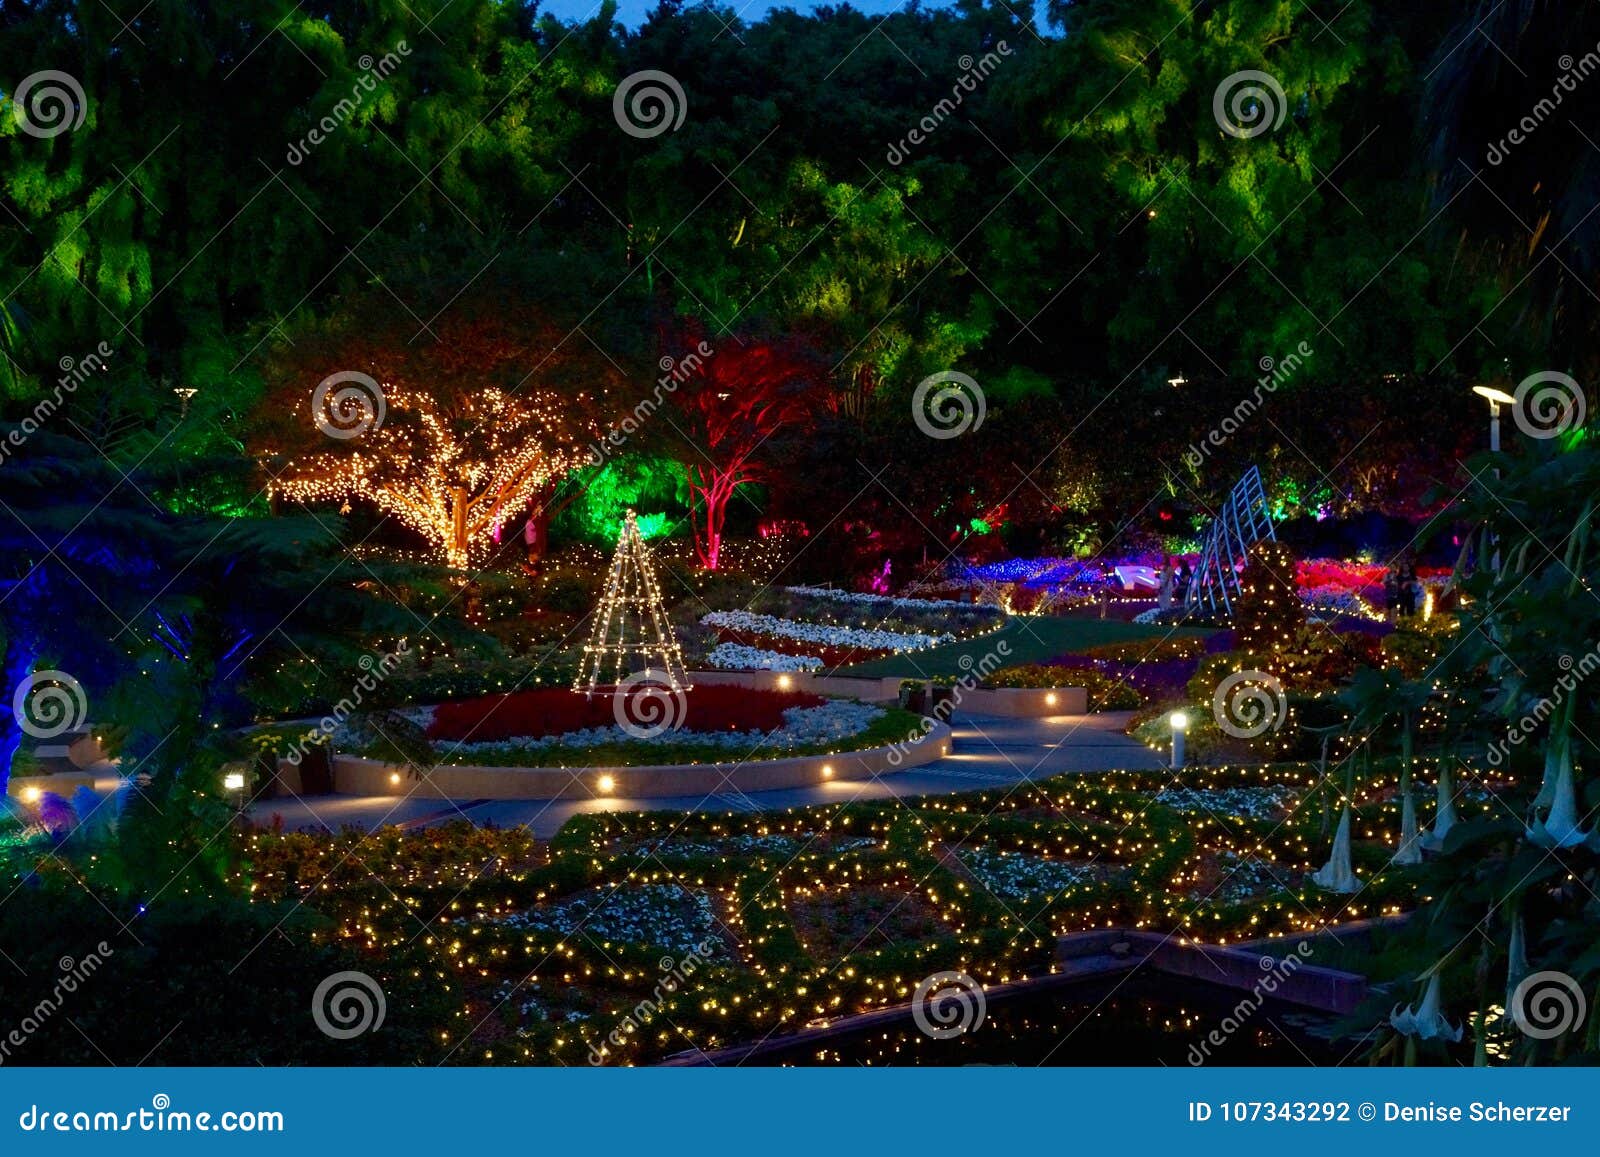 Enchanted Garden Fairy Lights By Night Stock Photo Image Of